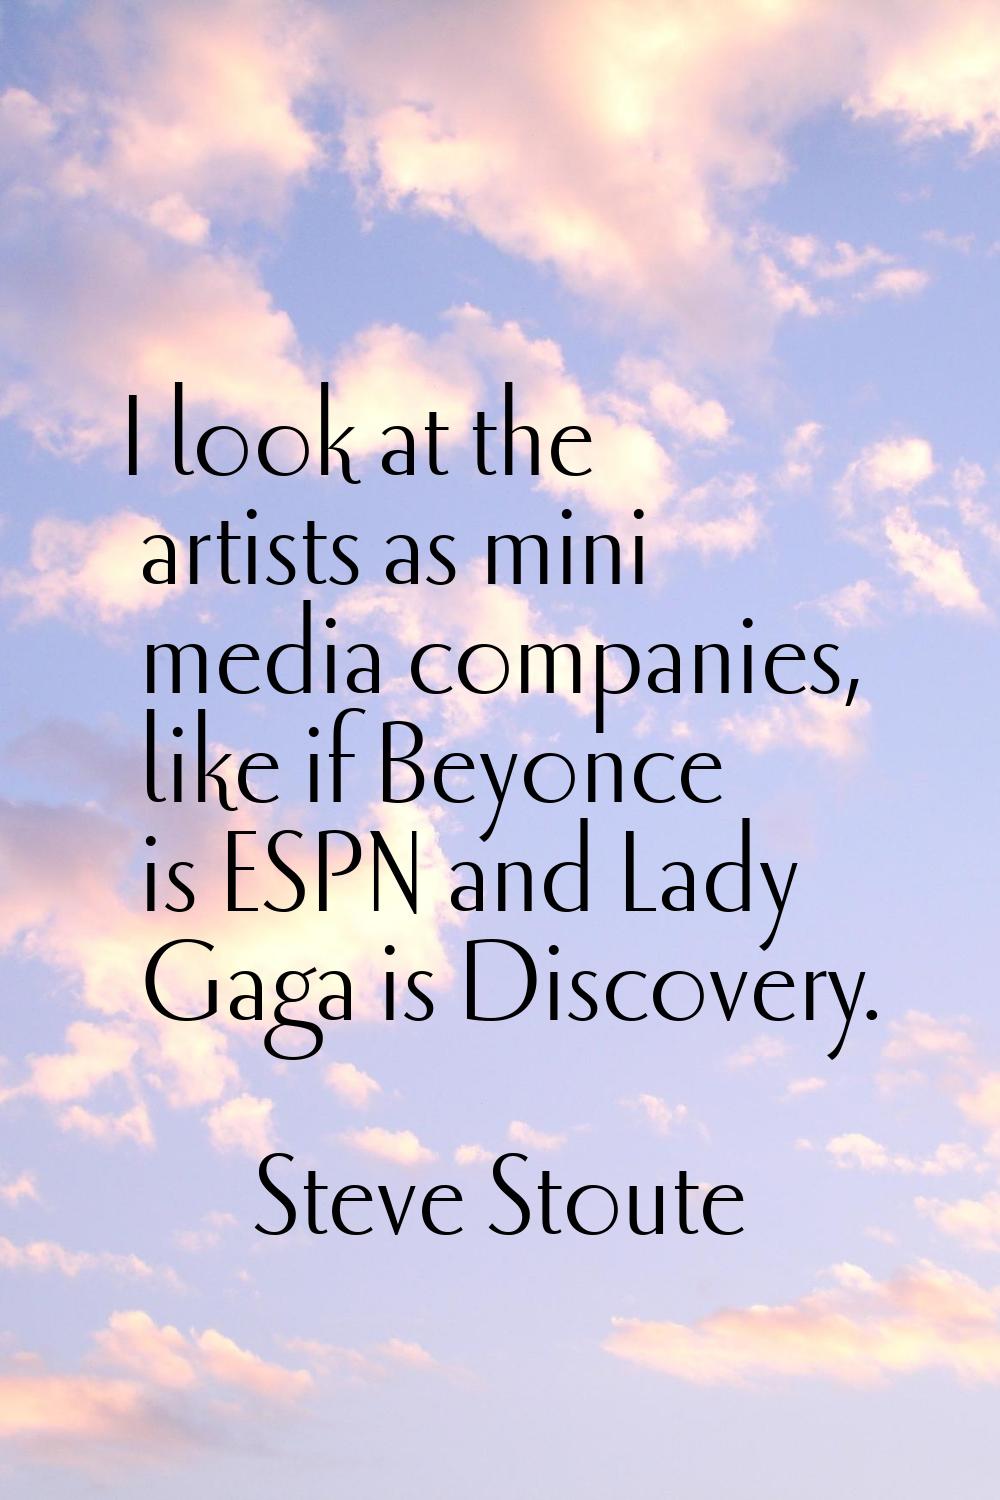 I look at the artists as mini media companies, like if Beyonce is ESPN and Lady Gaga is Discovery.